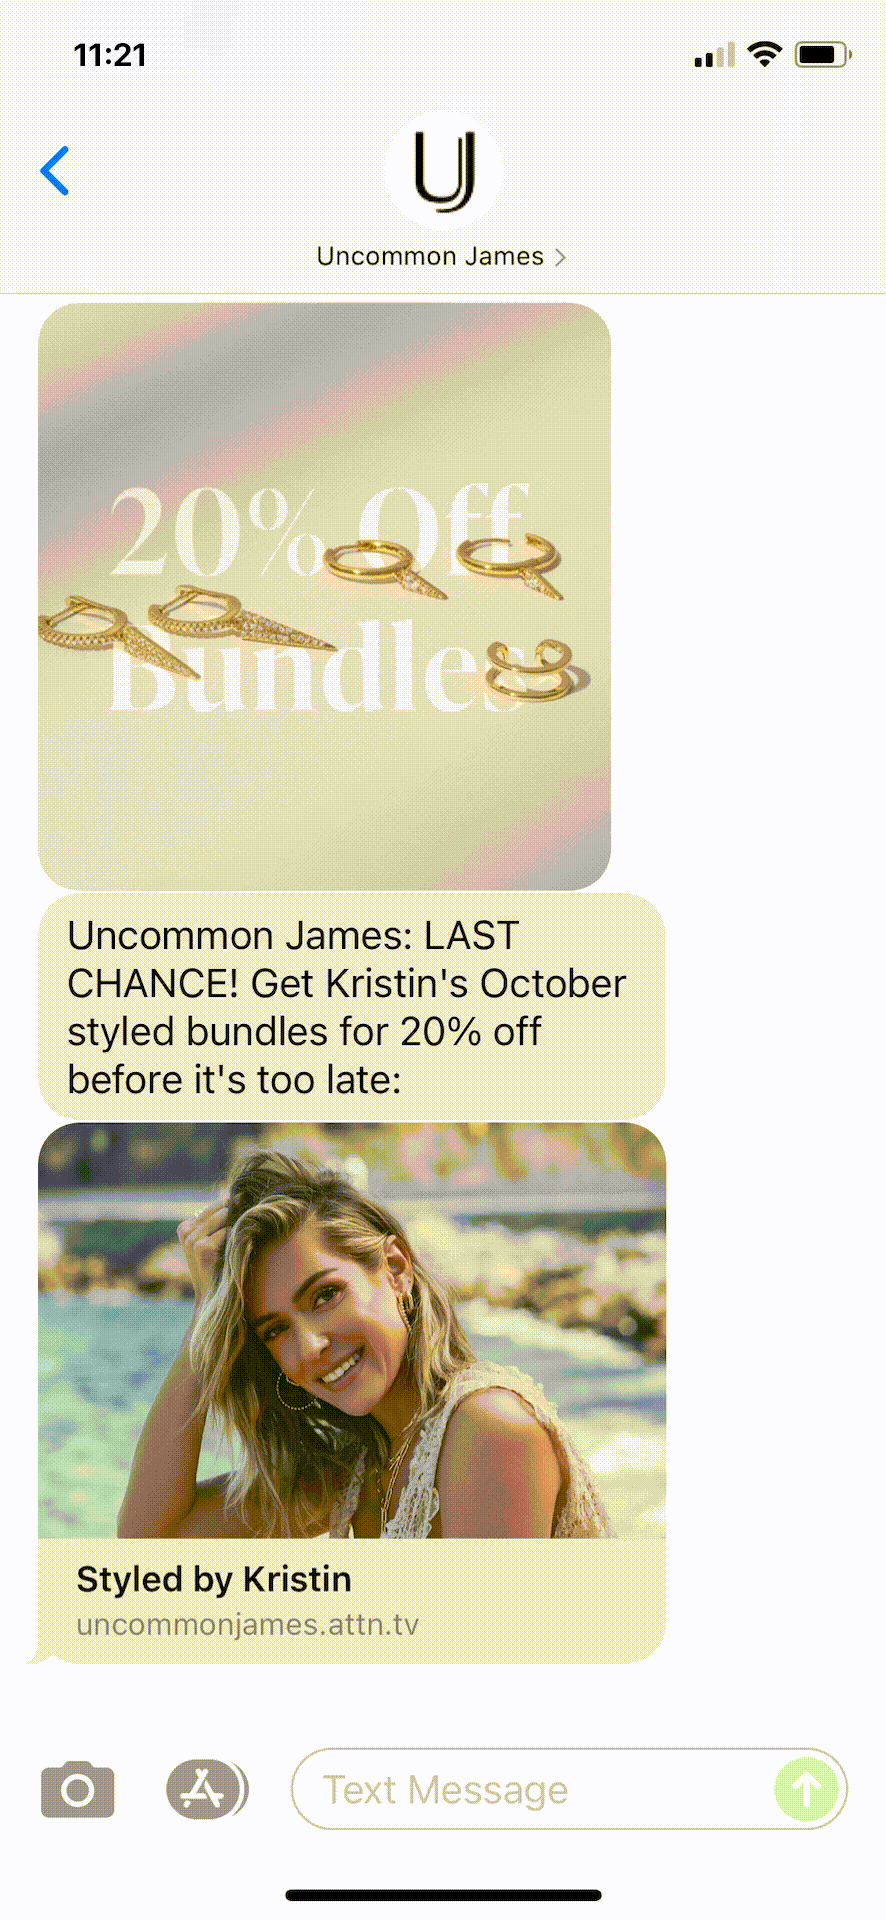 Uncommon-James-Text-Message-Marketing-Example-10.29.2021